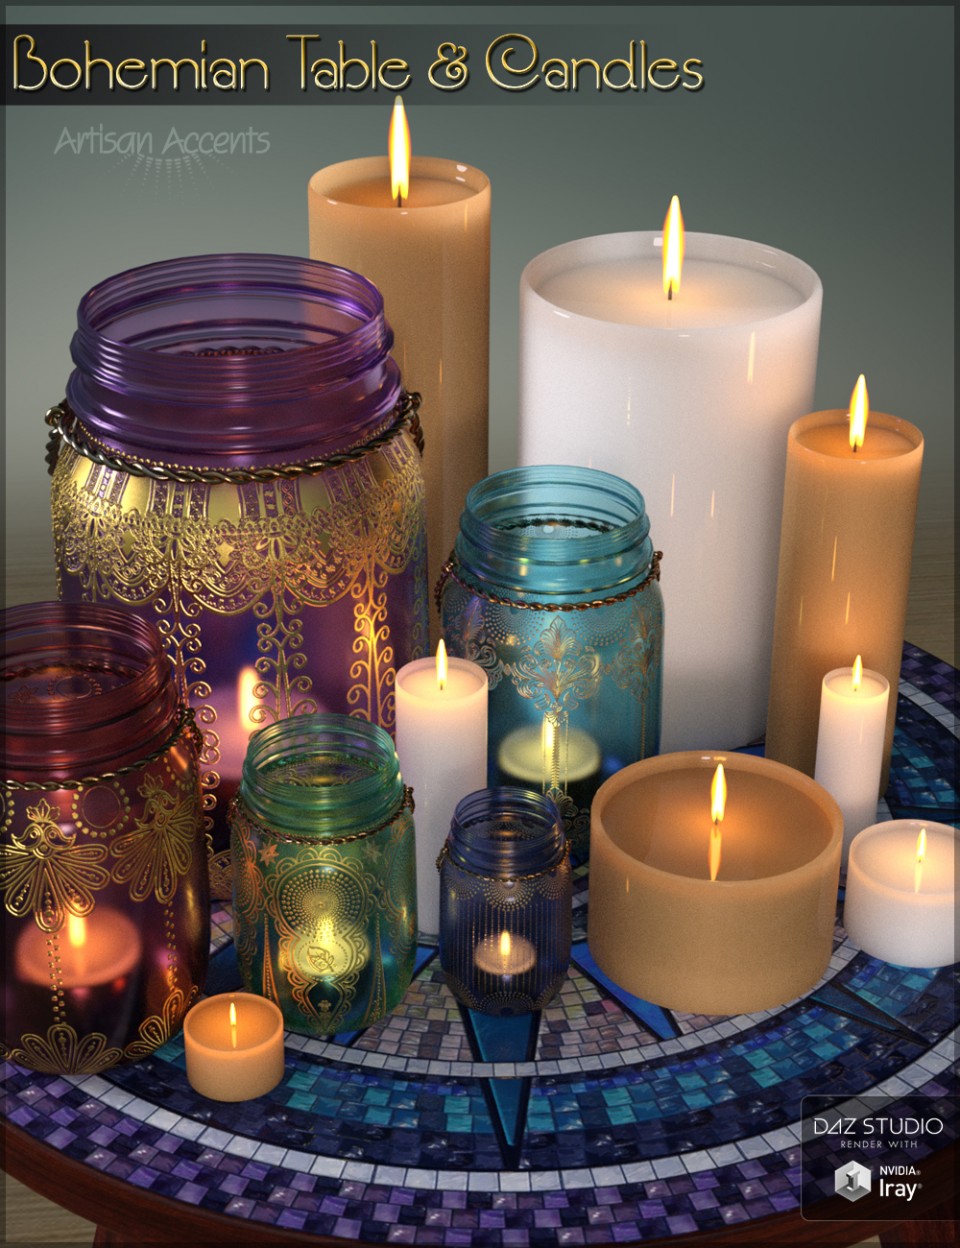 Bohemian Table and Candles